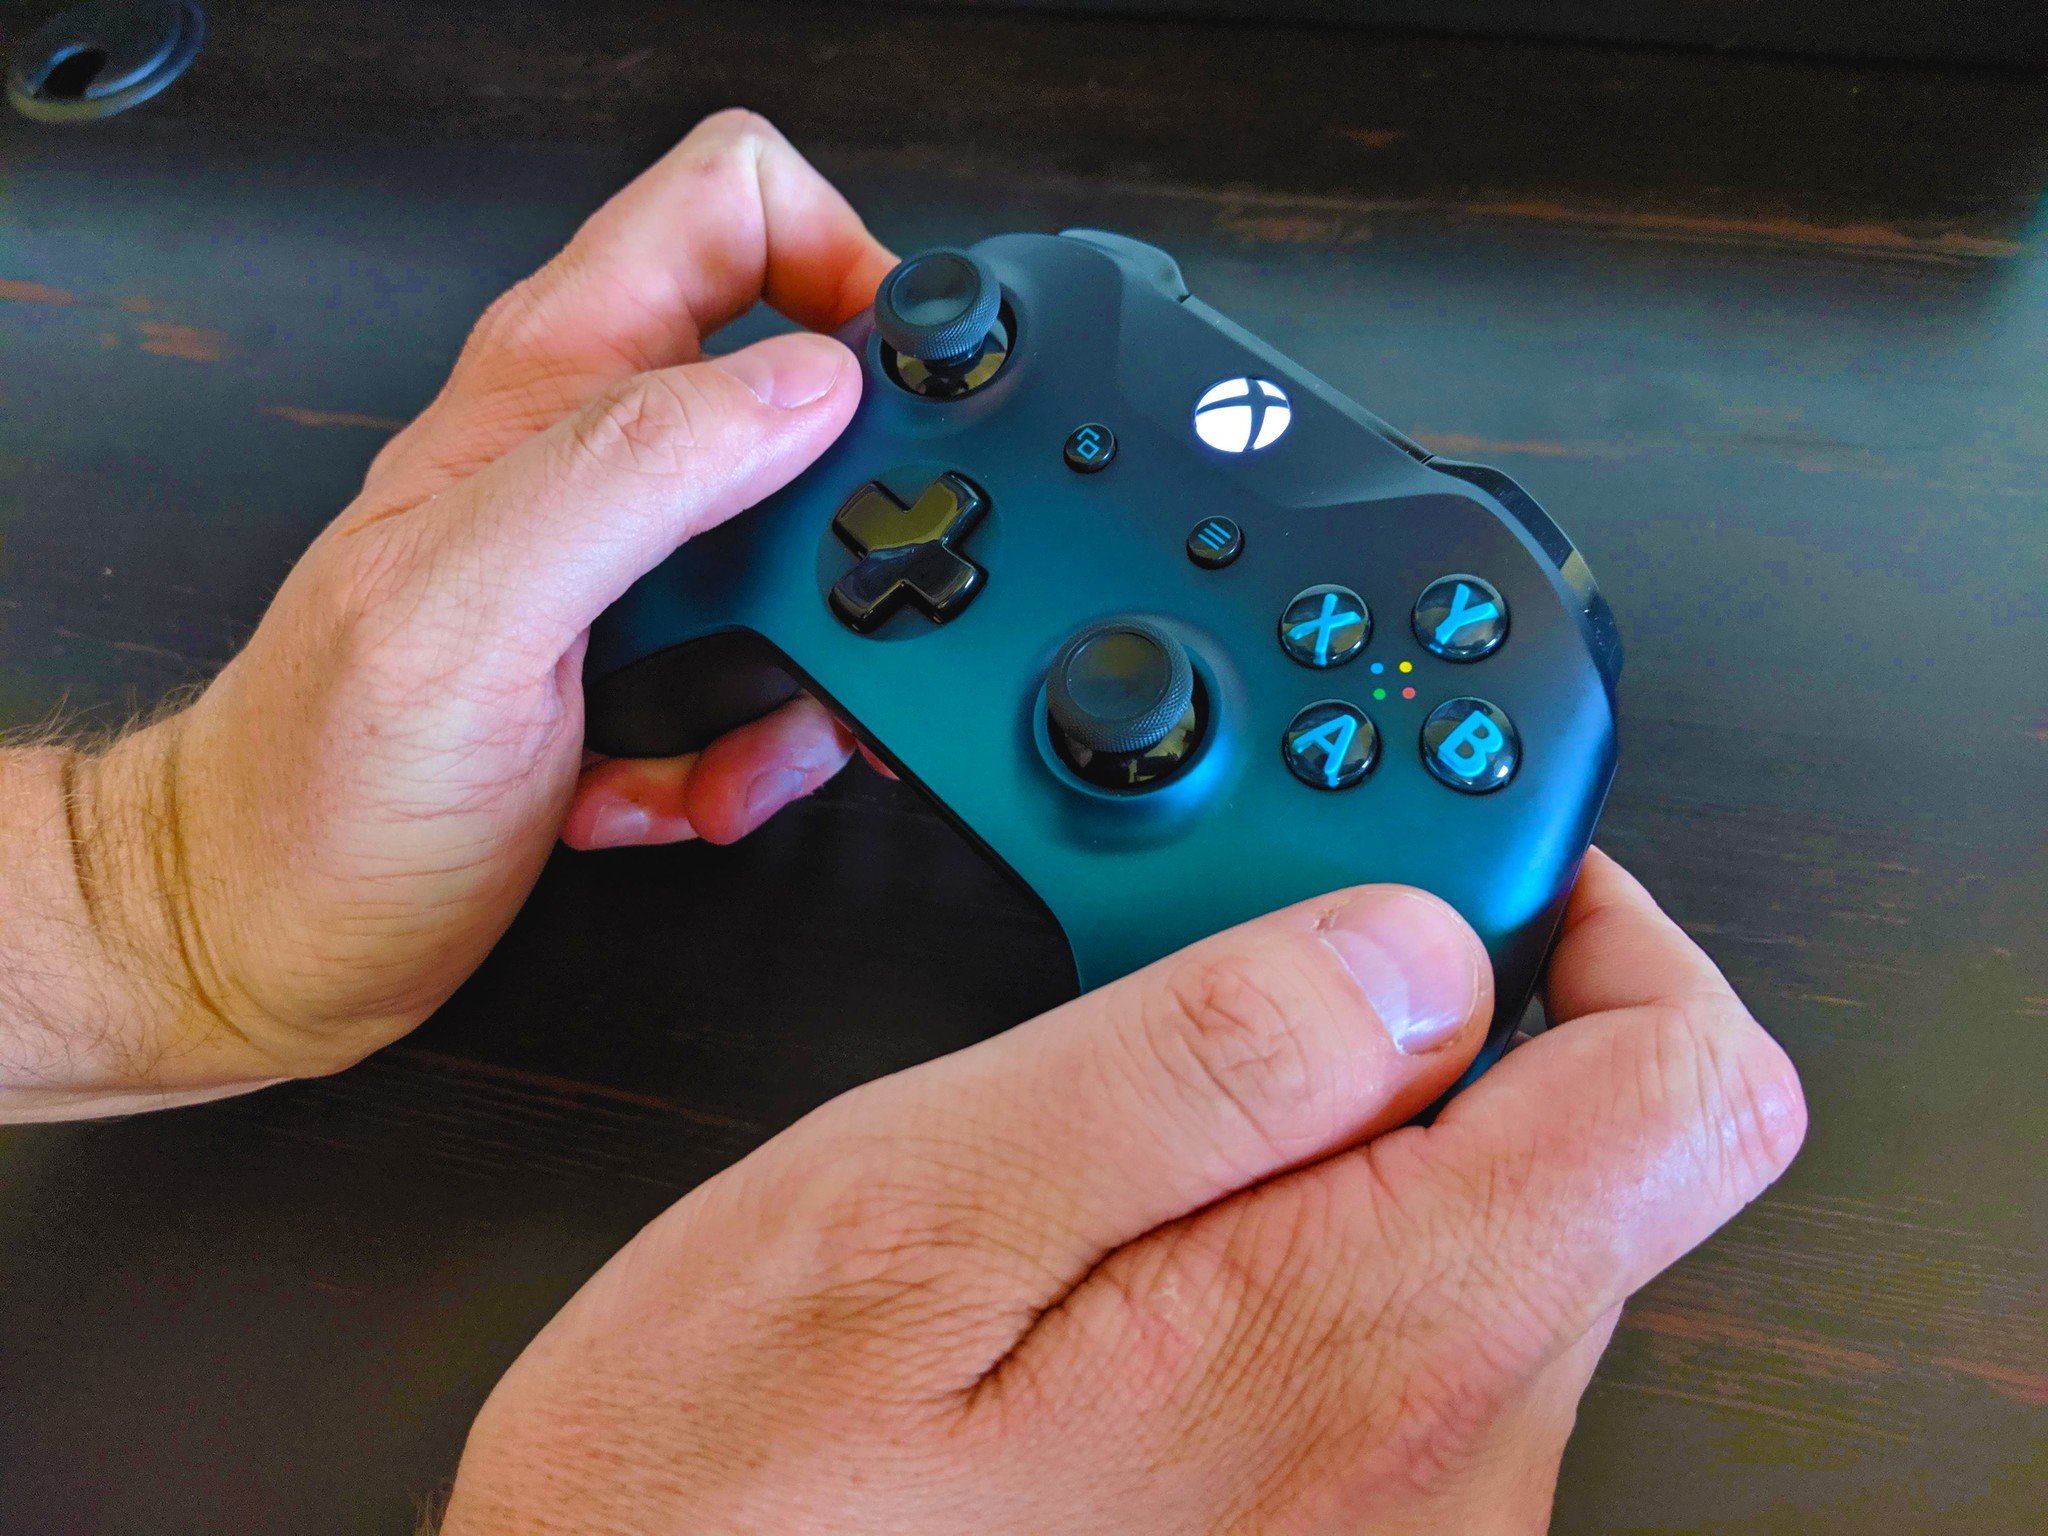 How to connect your Xbox One controller with the Nintendo Switch in wireless tabletop mode step seven: Hold the Xbox One controller near the Switch until the Xbox symbol stops flashing